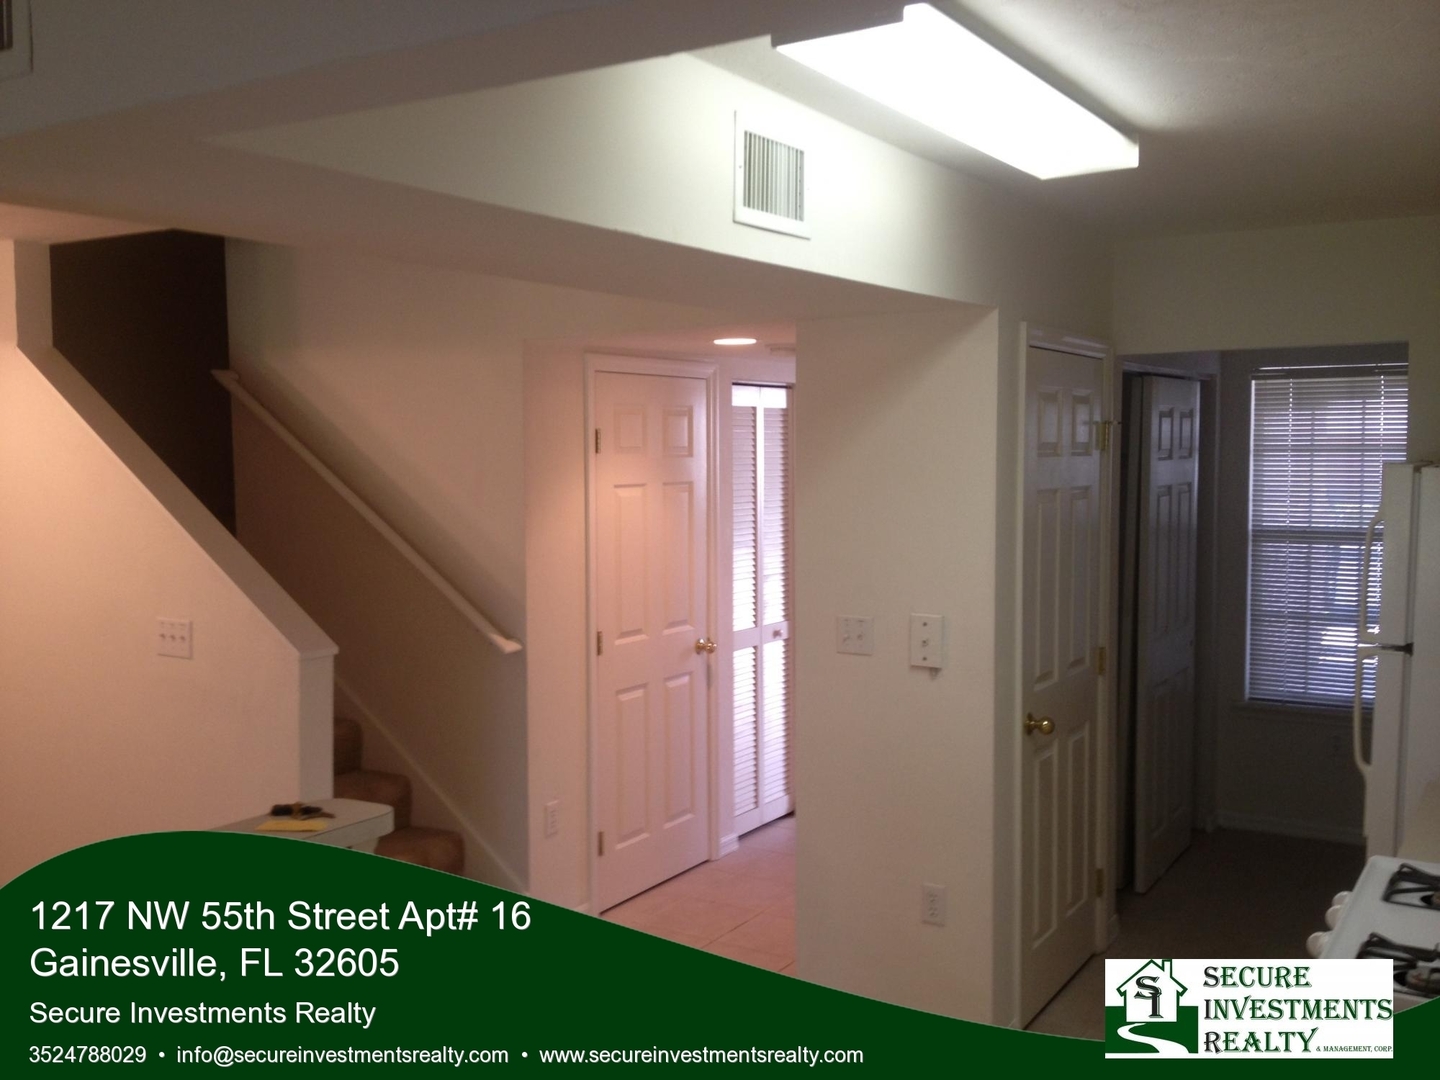 Nice condo in quiet small community close to shopping, Sante Fe and Buchholz High